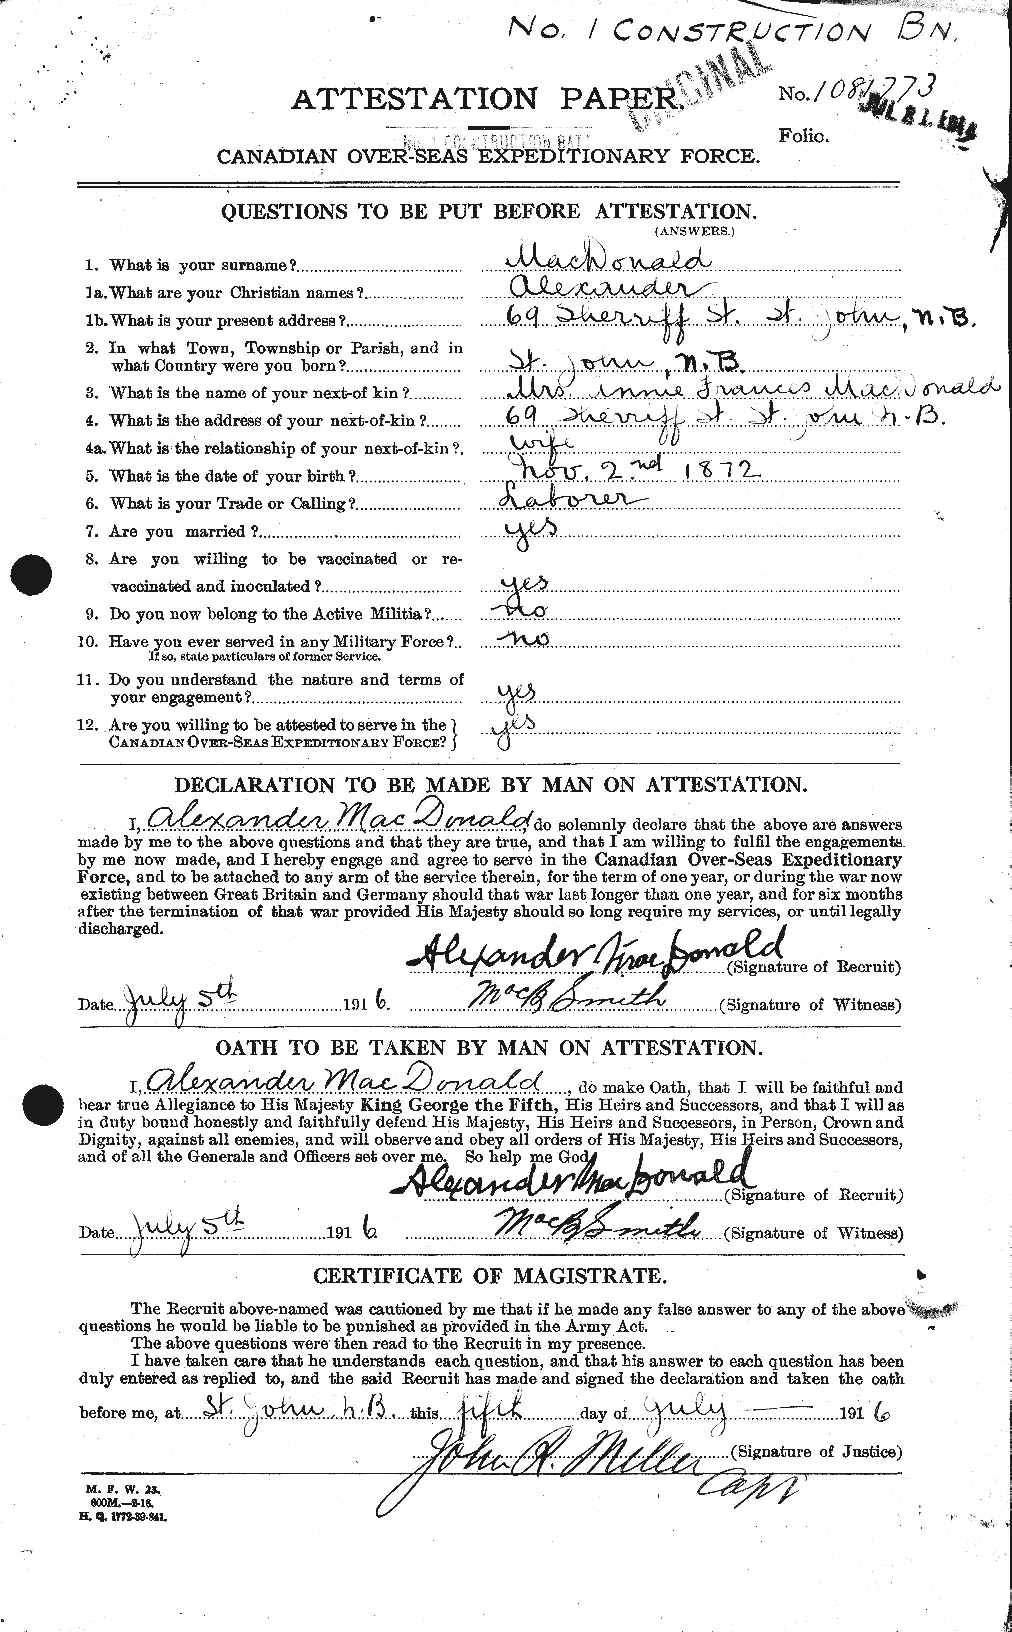 Personnel Records of the First World War - CEF 520204a